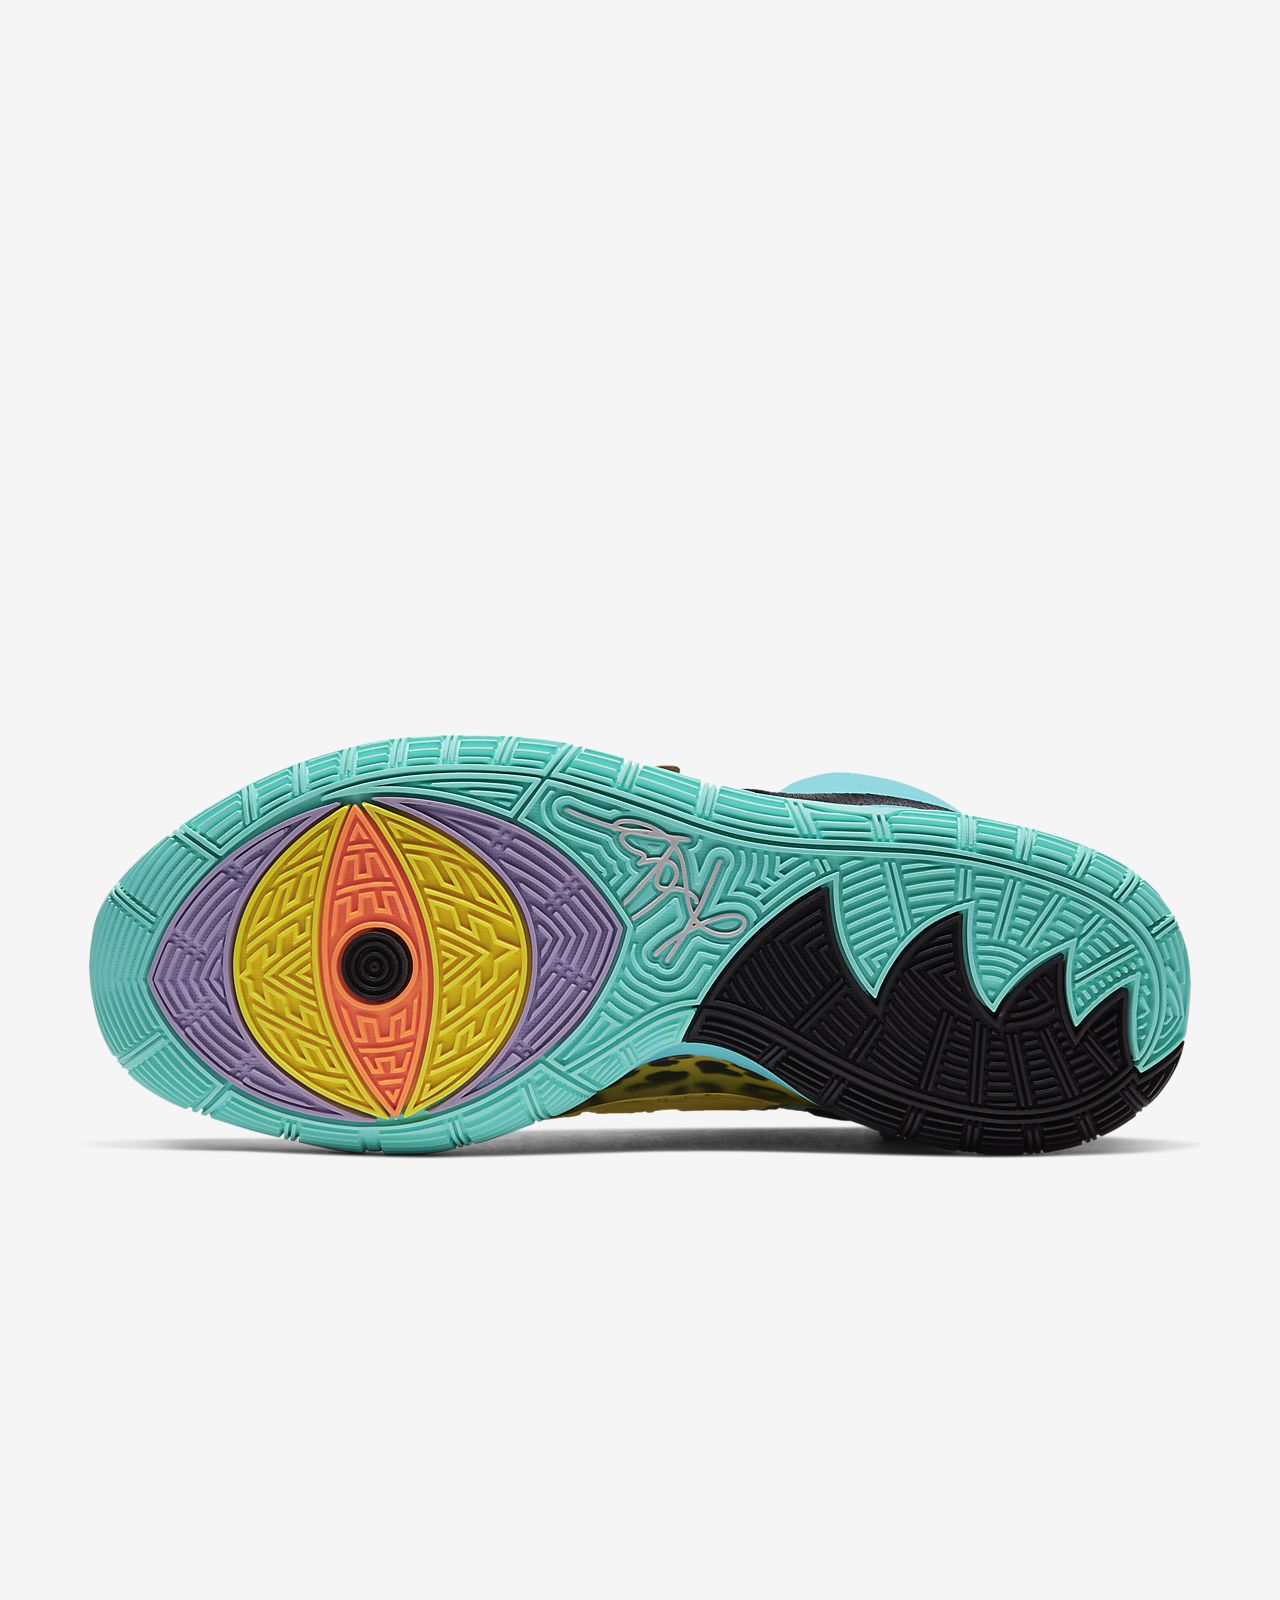 Chaussure de basketball personnalisable Kyrie 5 By You